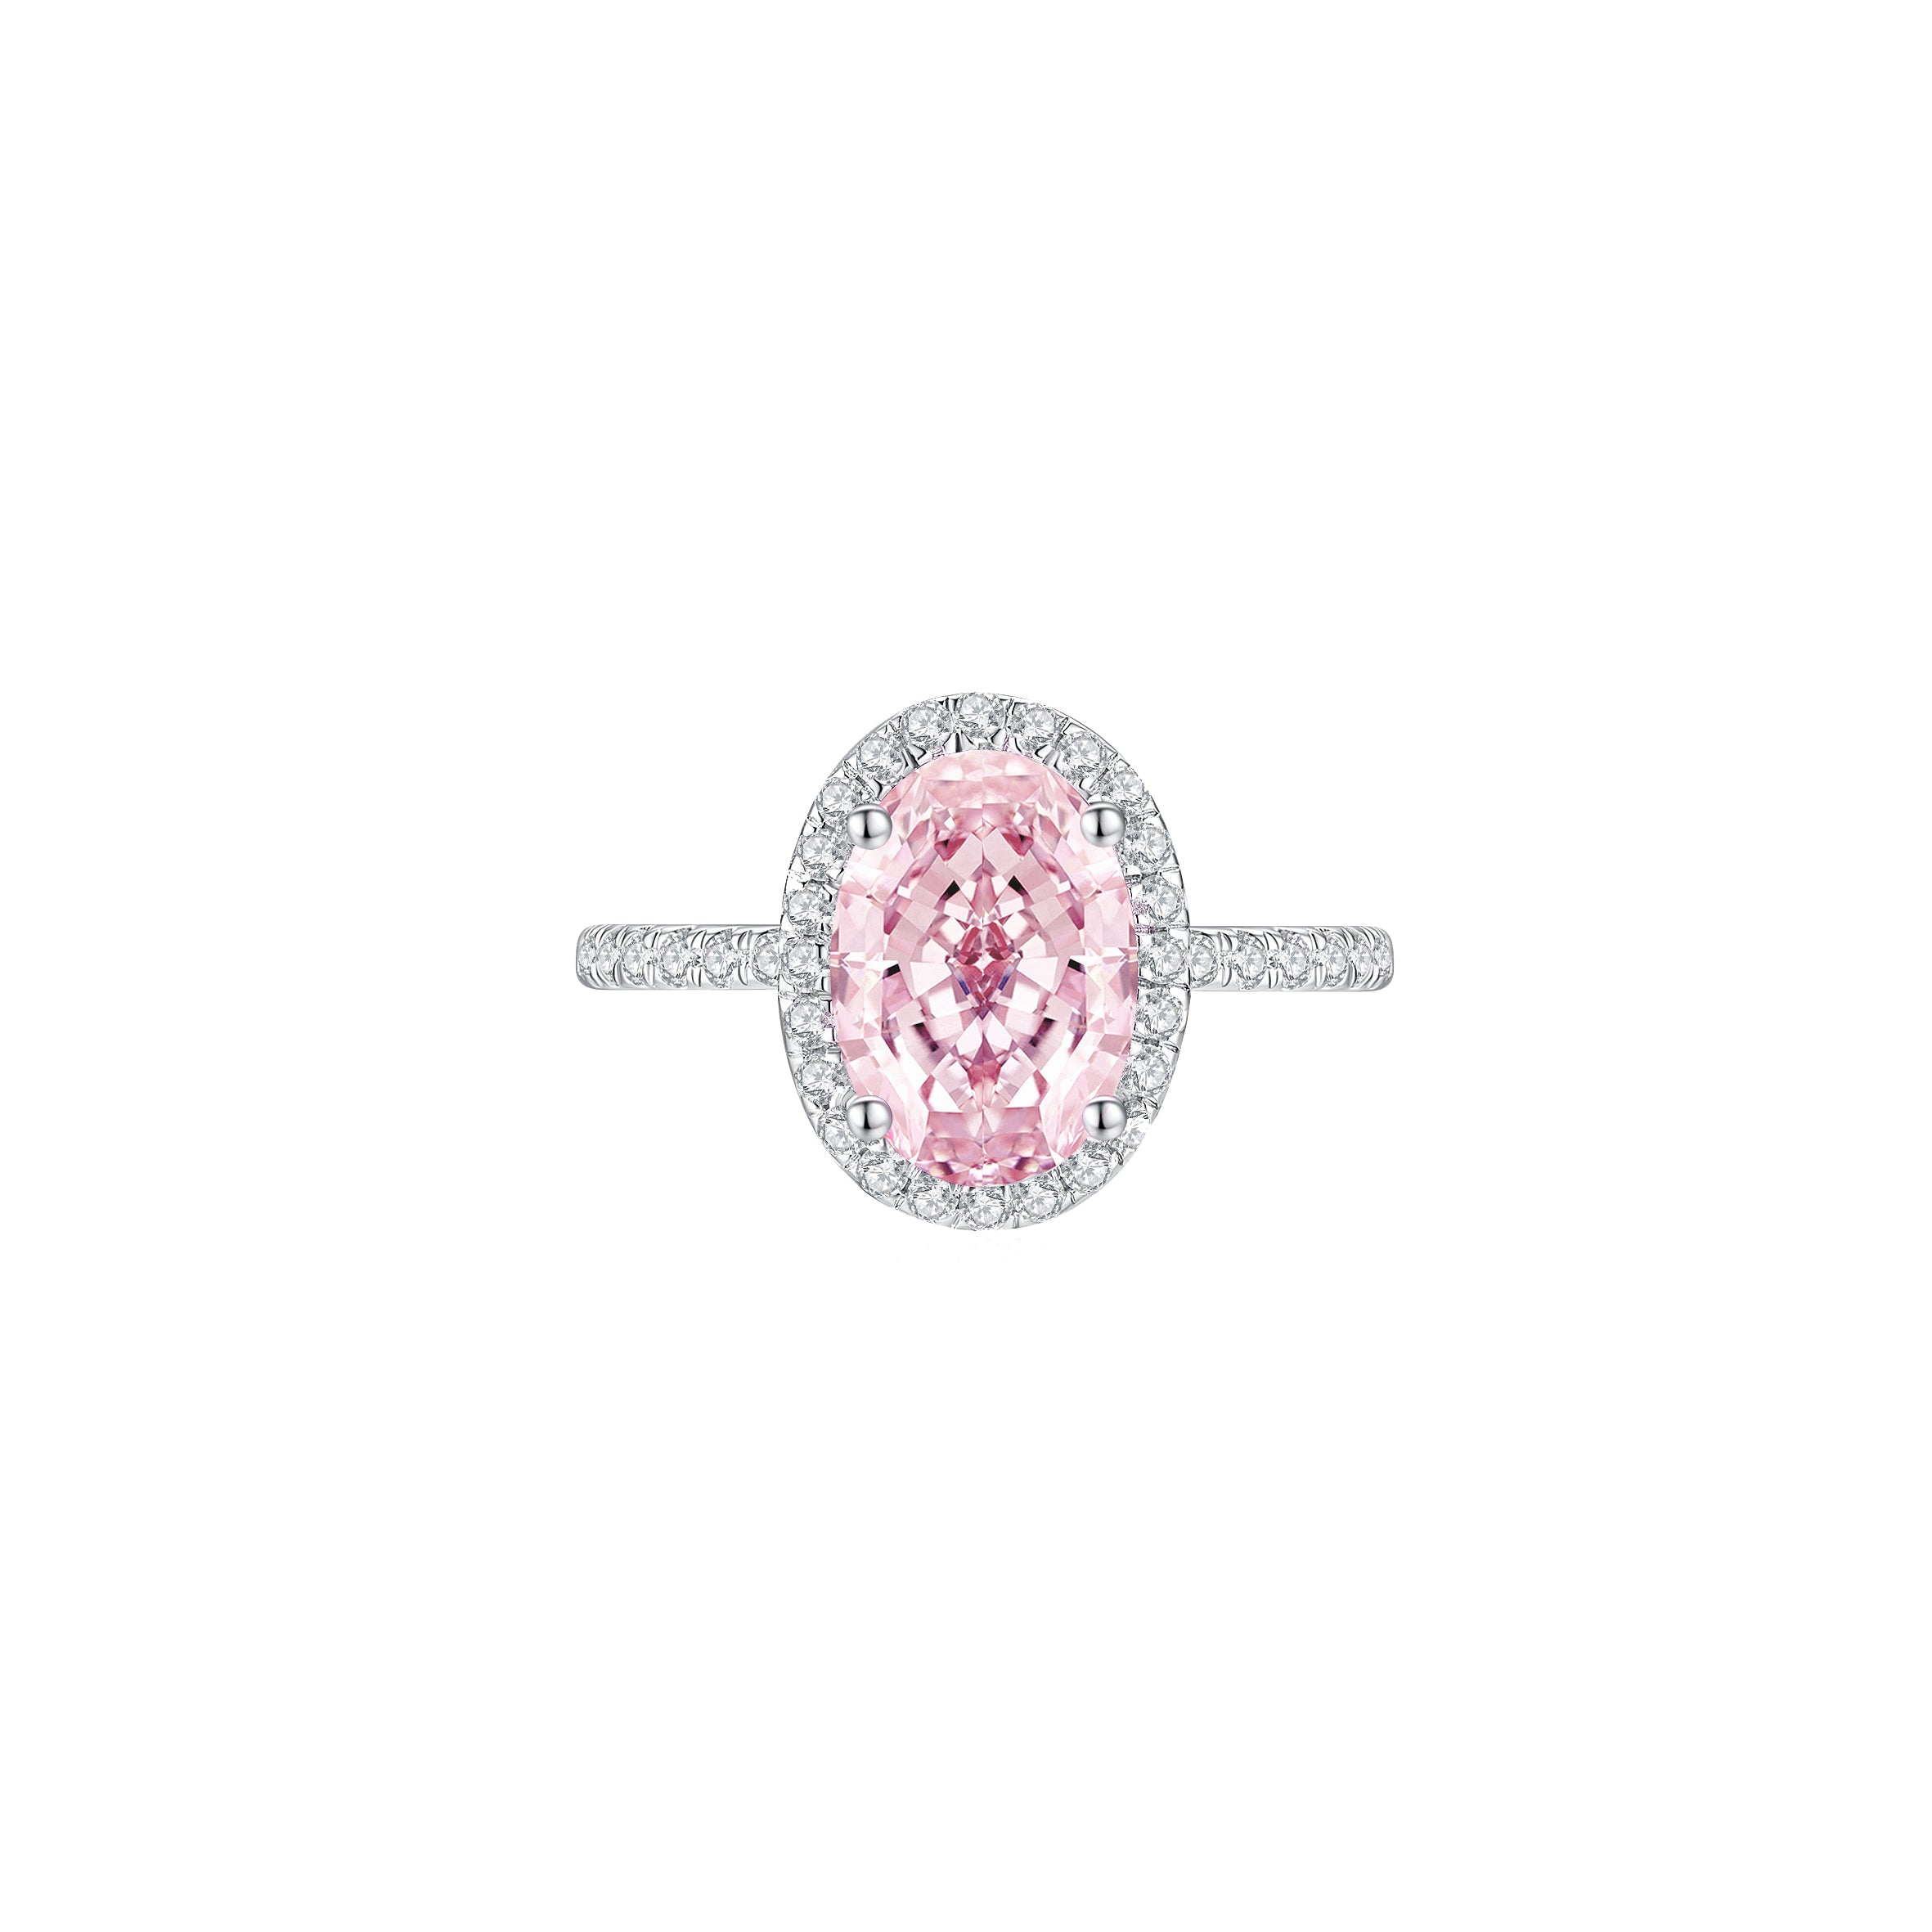 Bianca in Pink Ring - Eclat by Oui